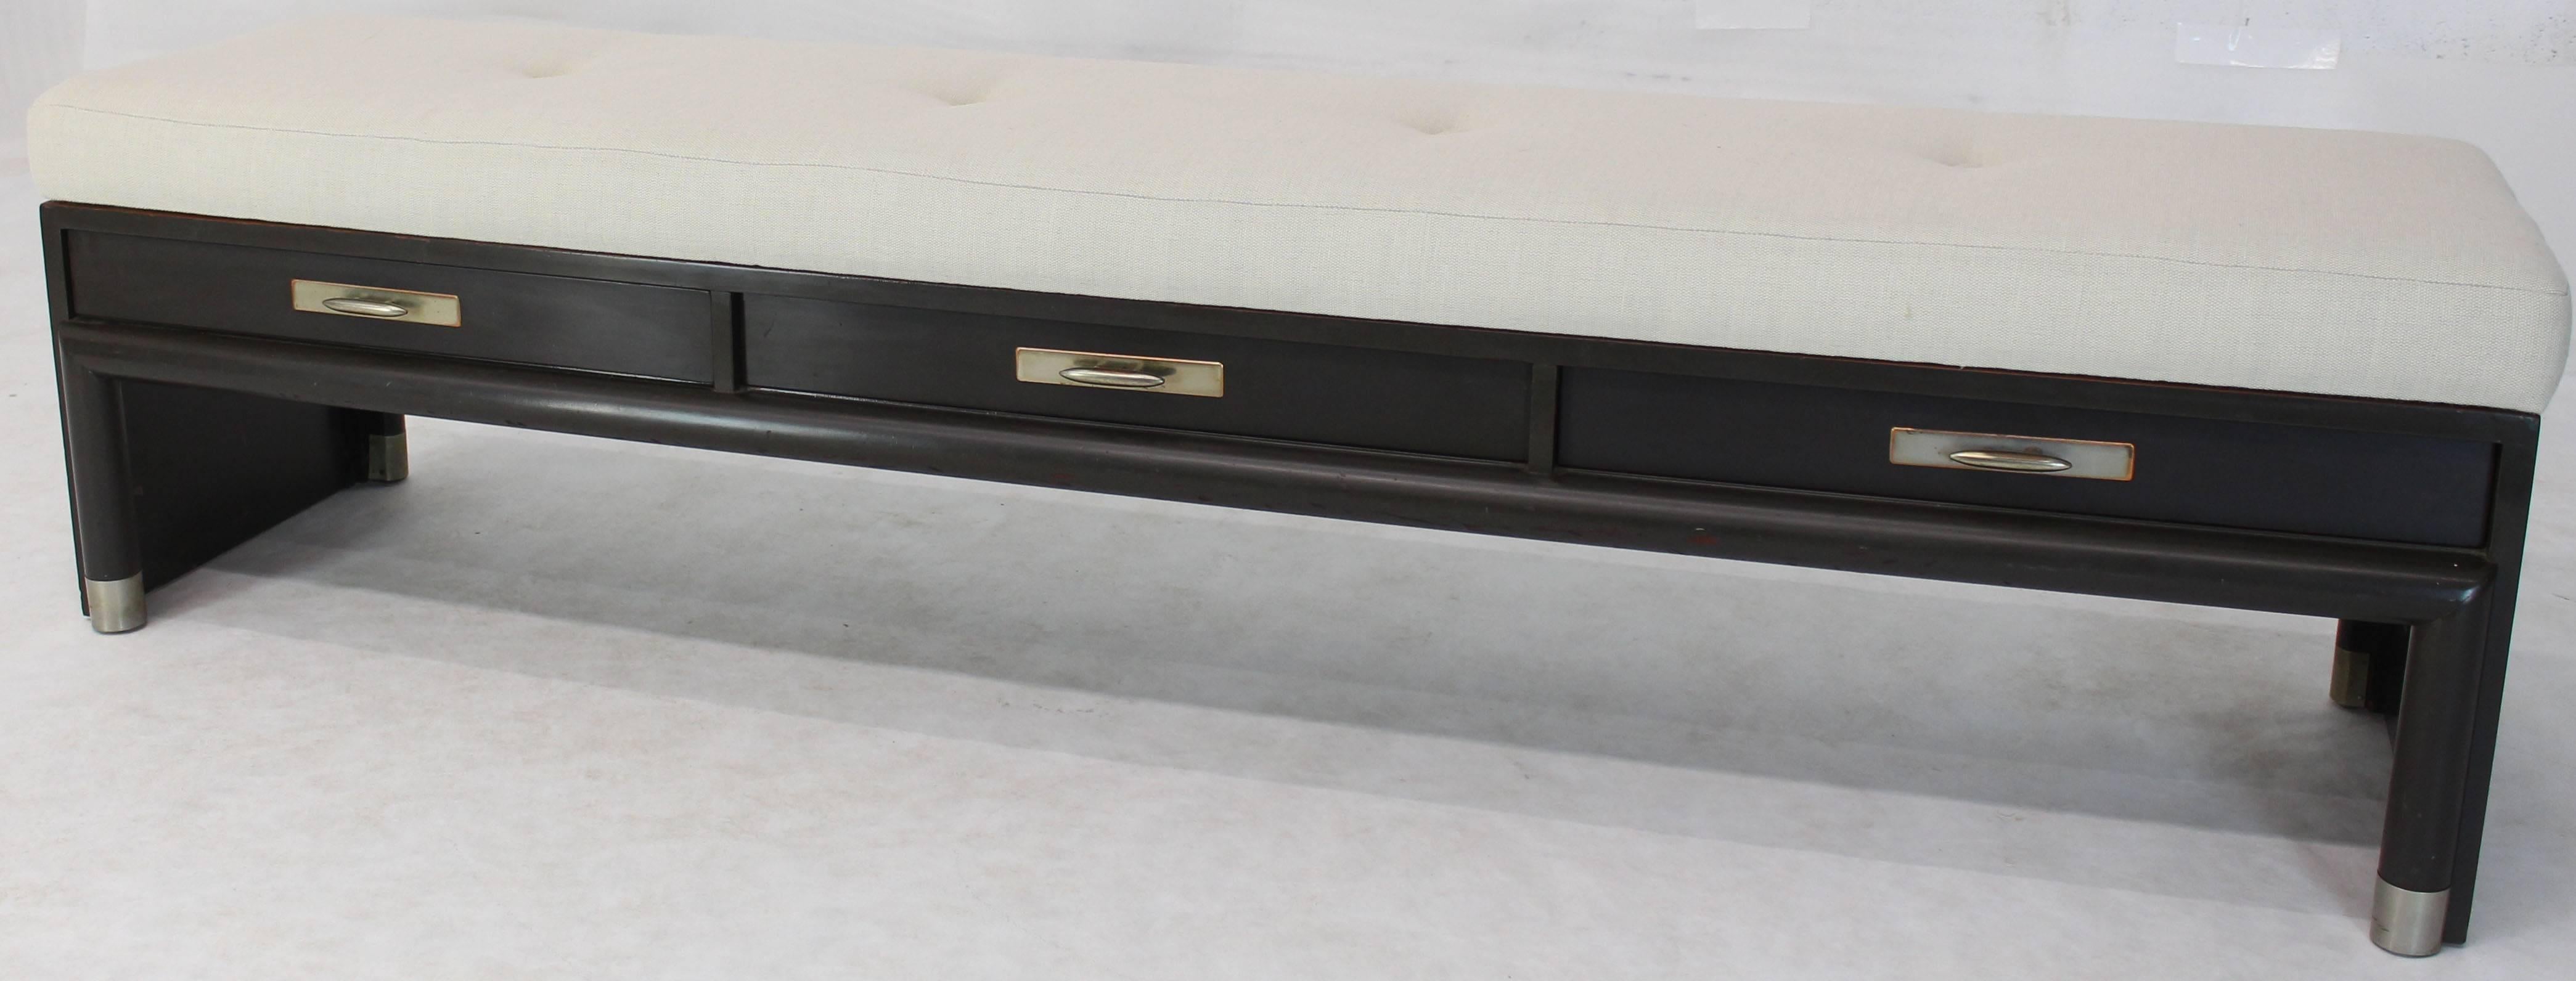 Ebonized finish base with three drawers upholstered bench or narrow daybed.